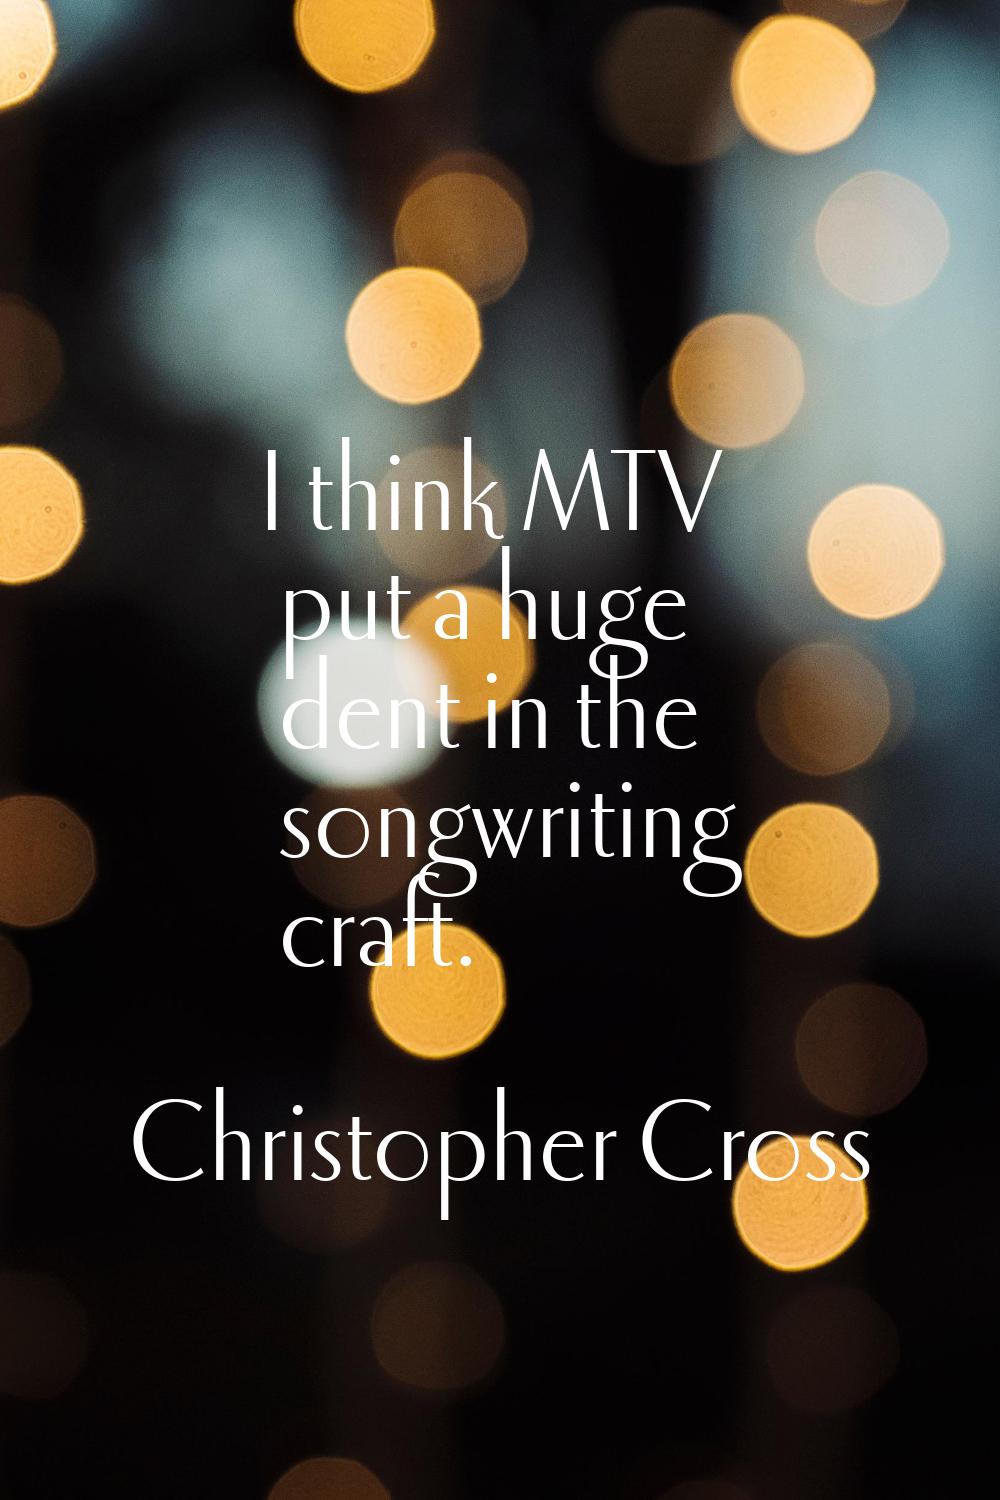 I think MTV put a huge dent in the songwriting craft.